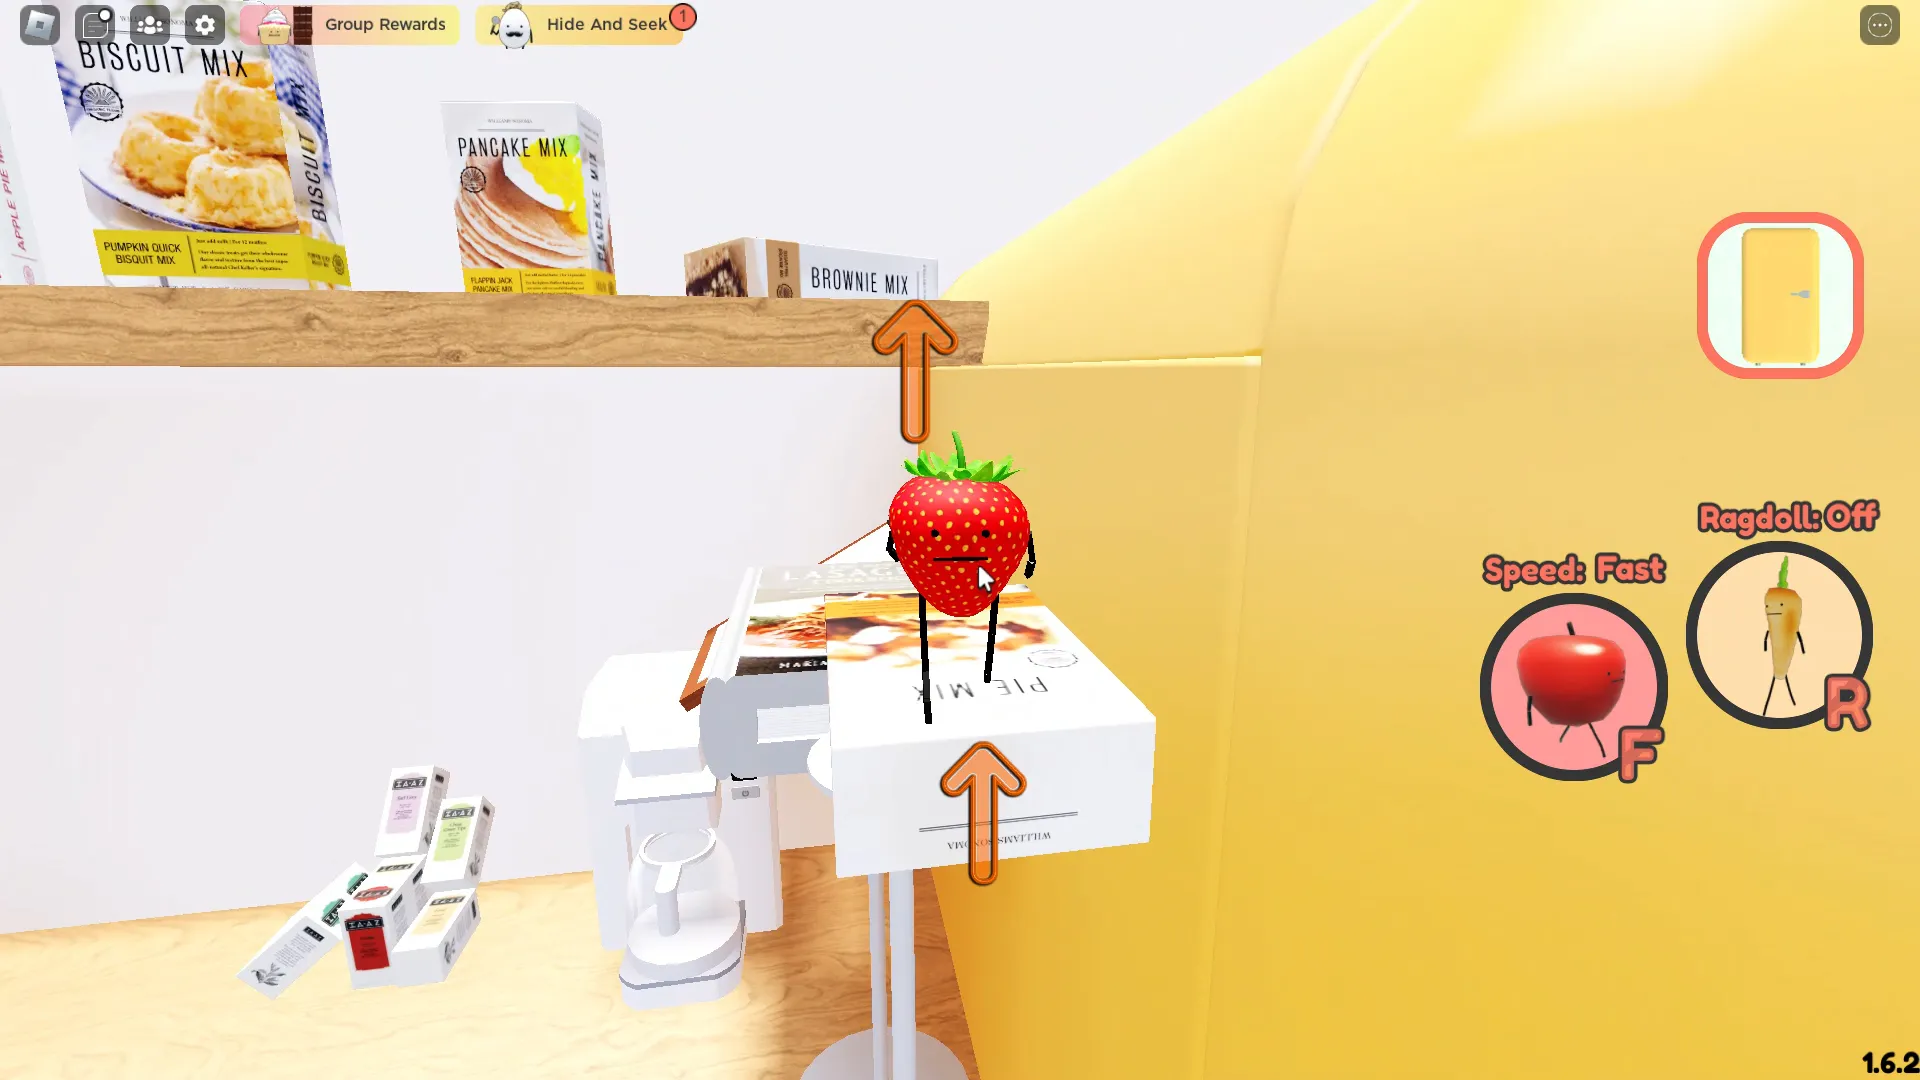 Roblox: Secret Staycation, the strawberry on the pie box